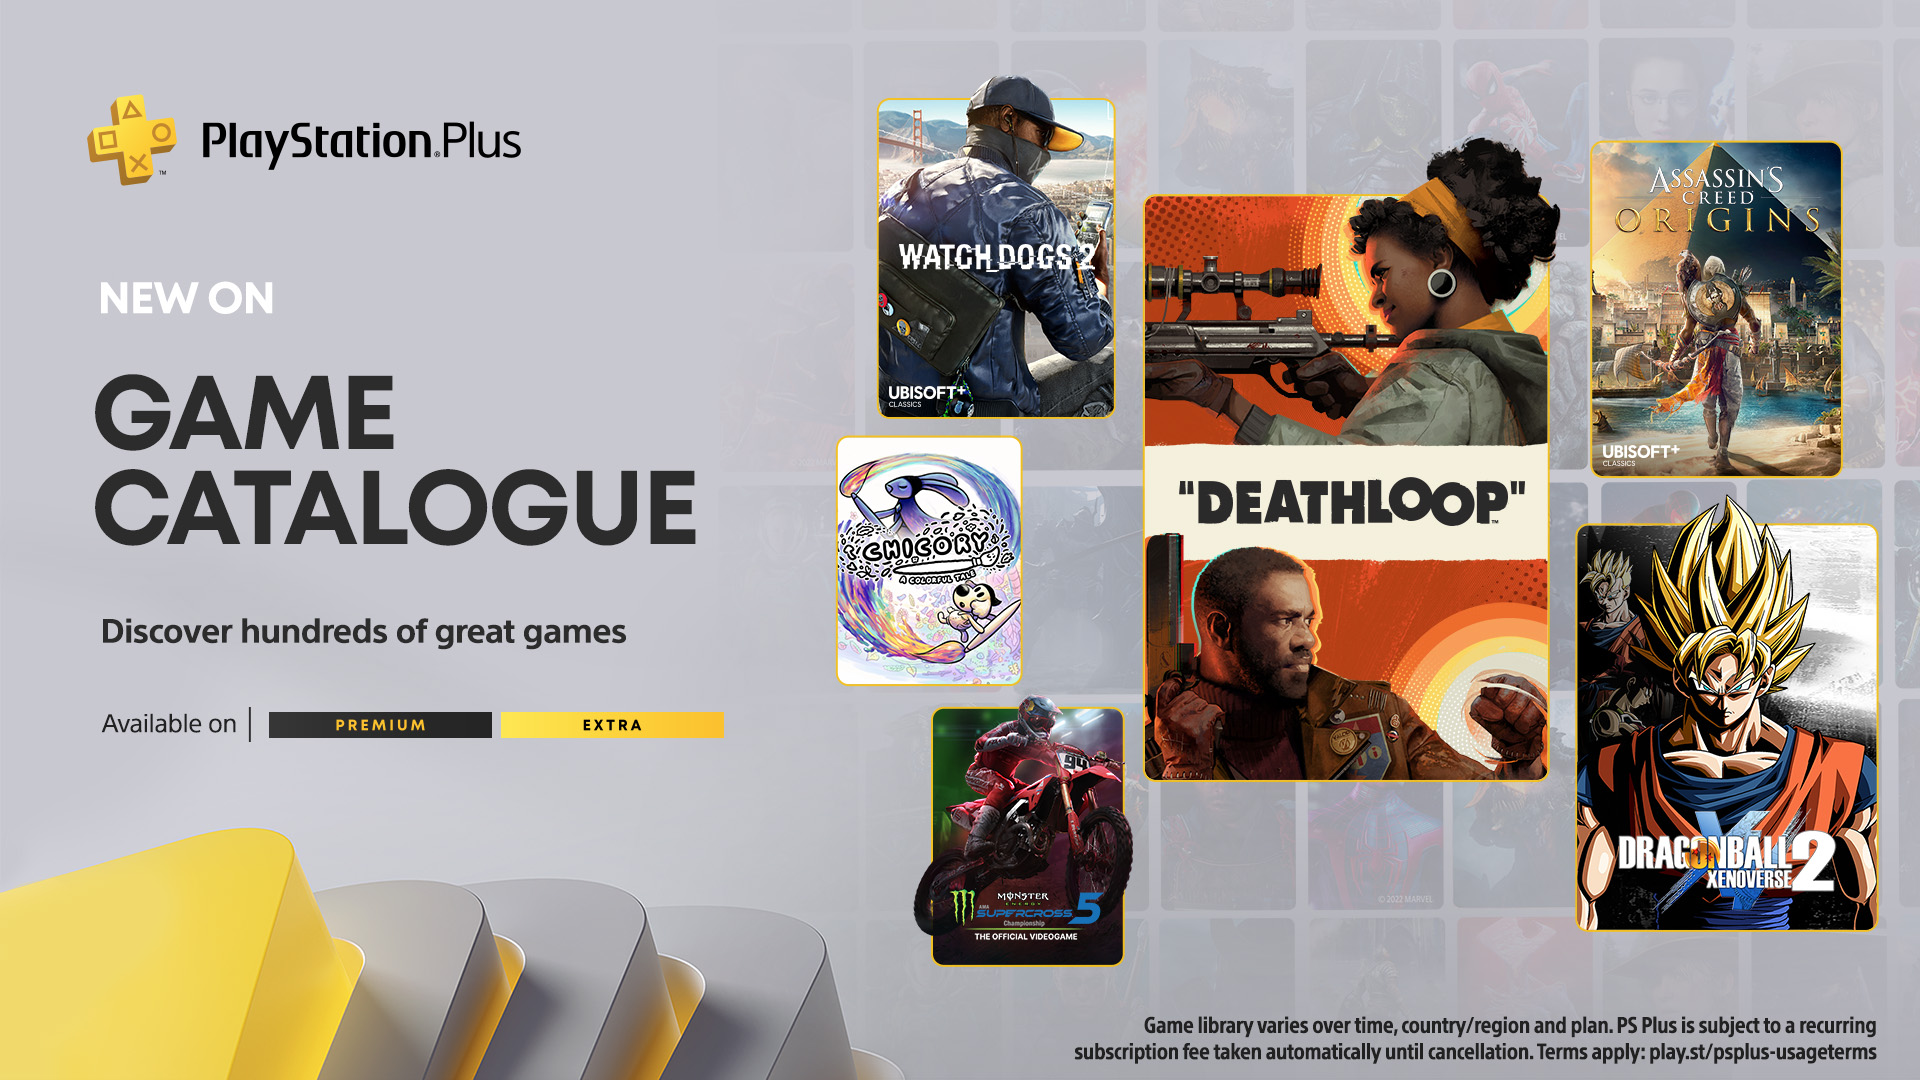 PlayStation Extra and Premium titles include Deathloop, Watch Dogs 2, Assassin’s Creed Origins, Dragon Ball Xenoverse 2, Chicory: A Colorful Tale and Monster Energy Supercross - The Official Videogame 5. Game Catalog varies over time, country/region and plan. An active PS Plus subscription is required, and is subject to a recurring fee.